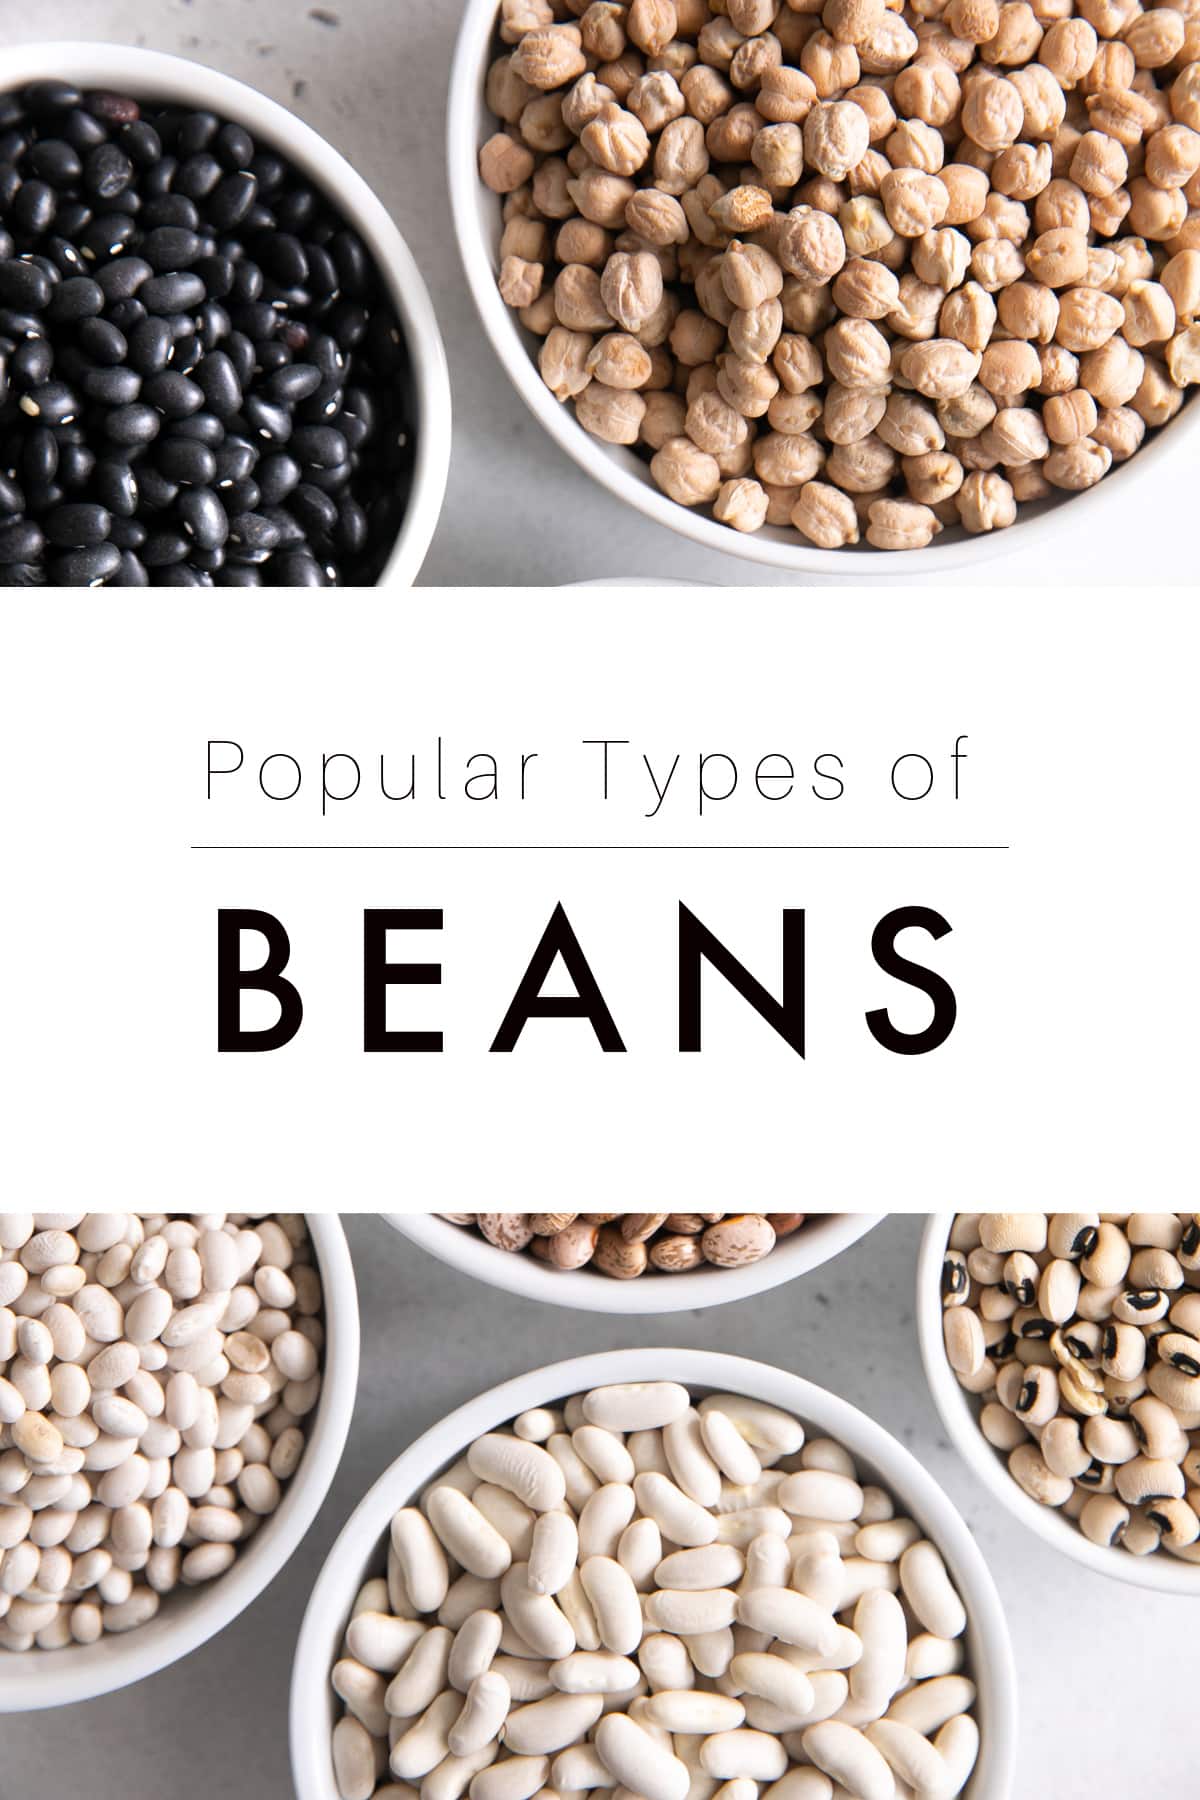 15 Different Types of Beans with Pictures